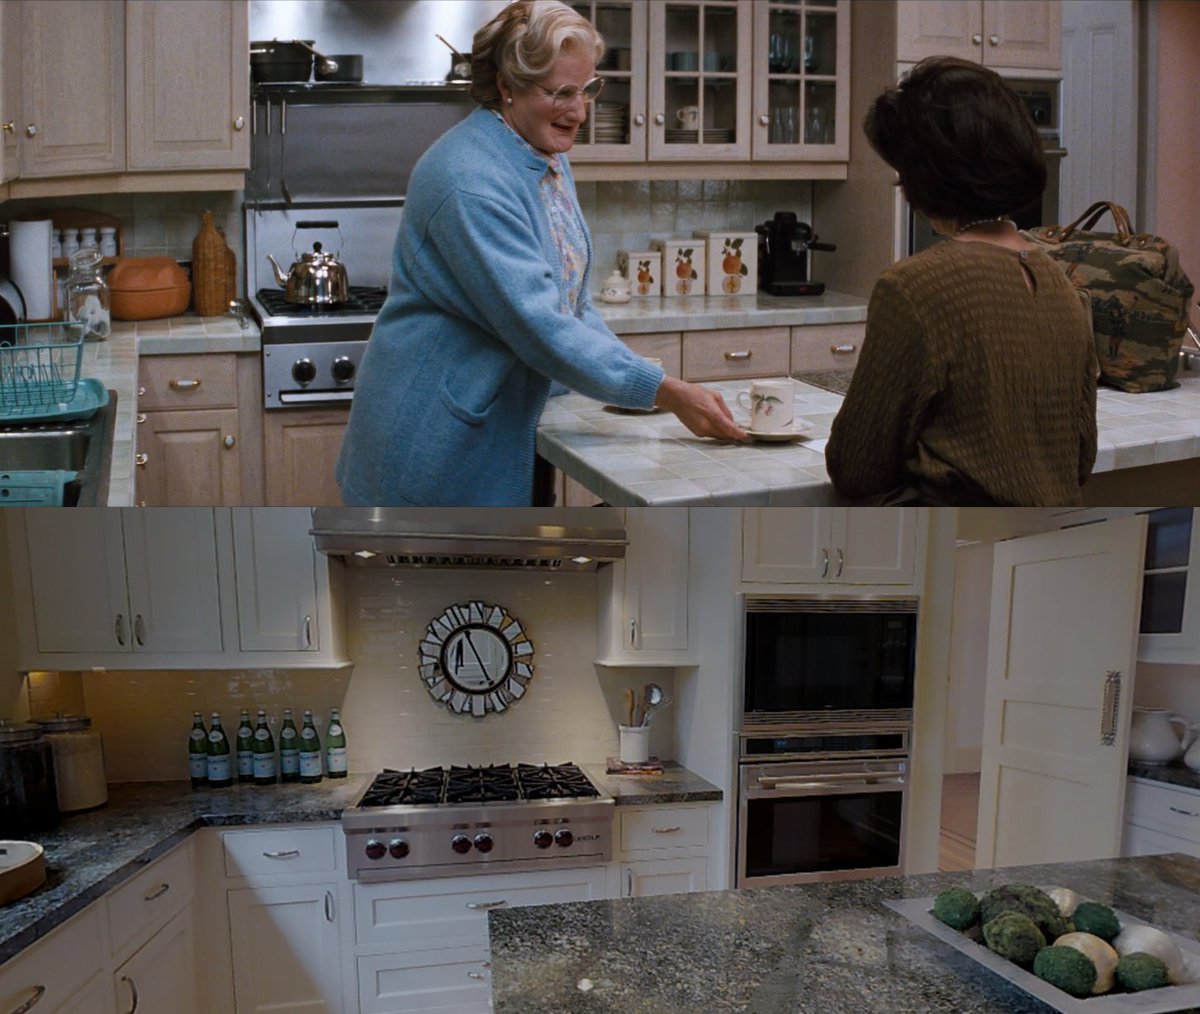 This is the biggest mystery to me: They somehow made the kitchen /less/ spacious?? The stove doesn't seem any closer to the sink side, but there's like 3ft of countertop missing as you move to the ovens. Camera trick, or major overhaul? No clue here.